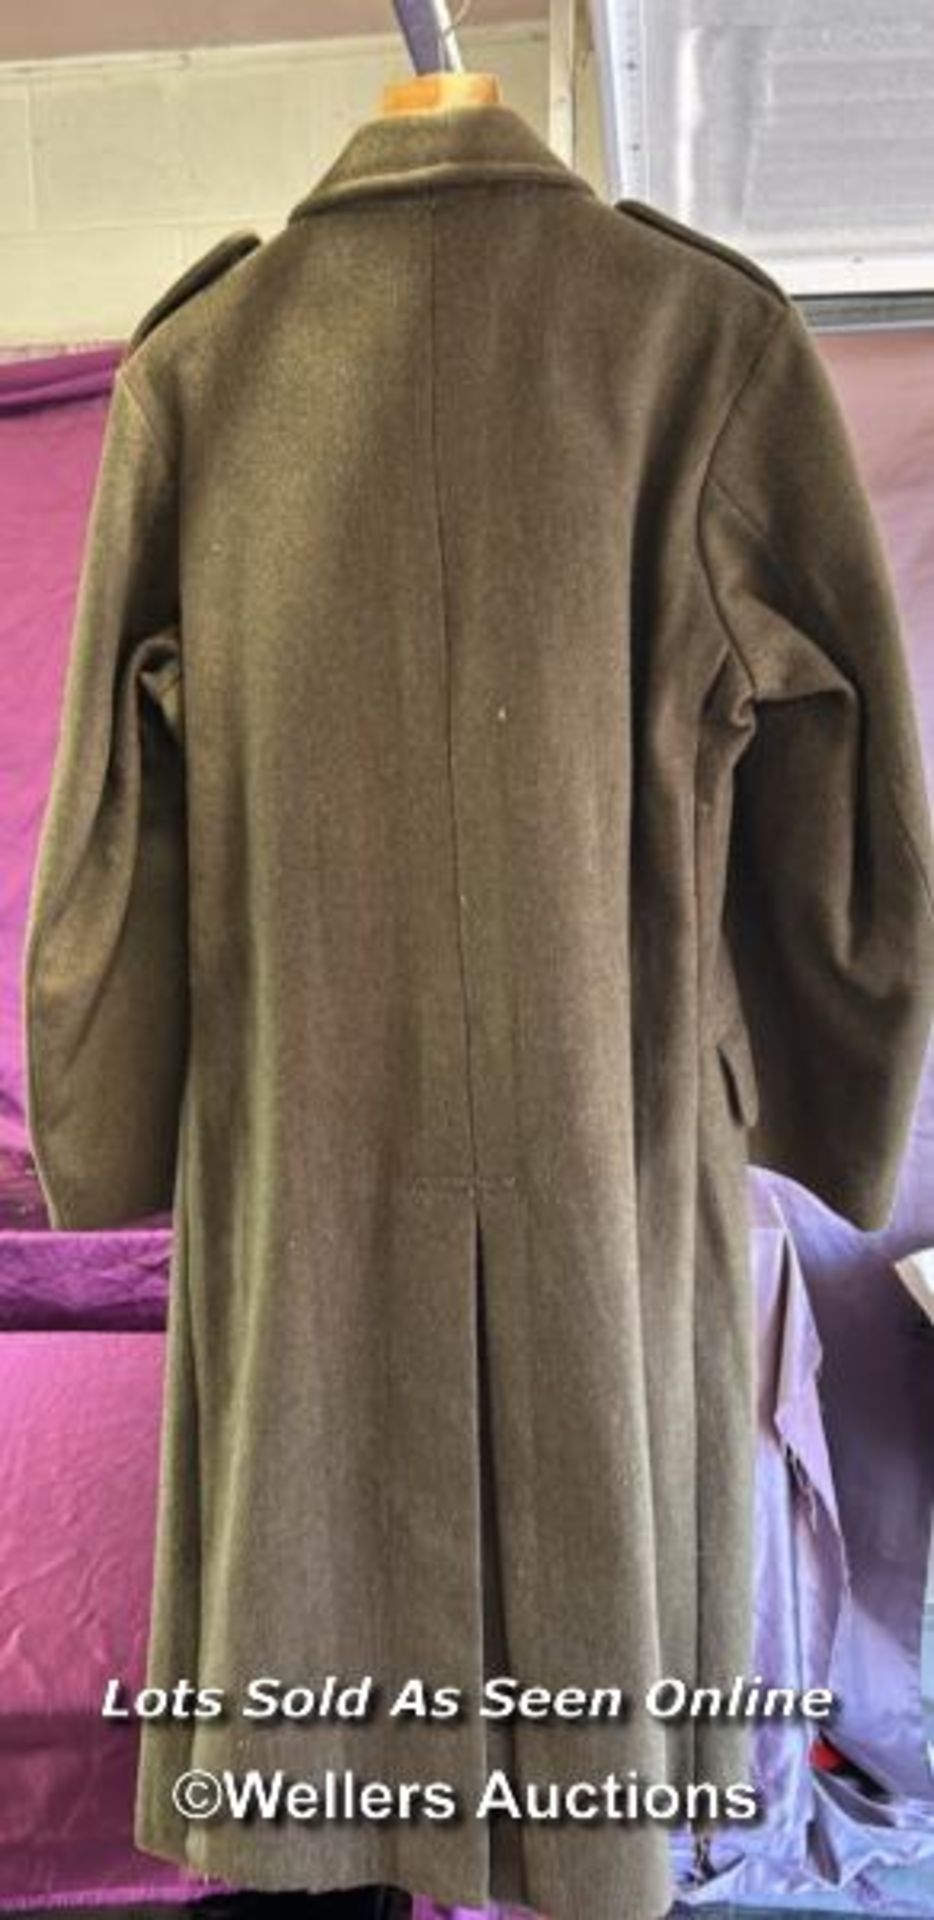 1950 KHAKI MILITARY COAT BY H. LOTTERY & CO. - Image 5 of 5